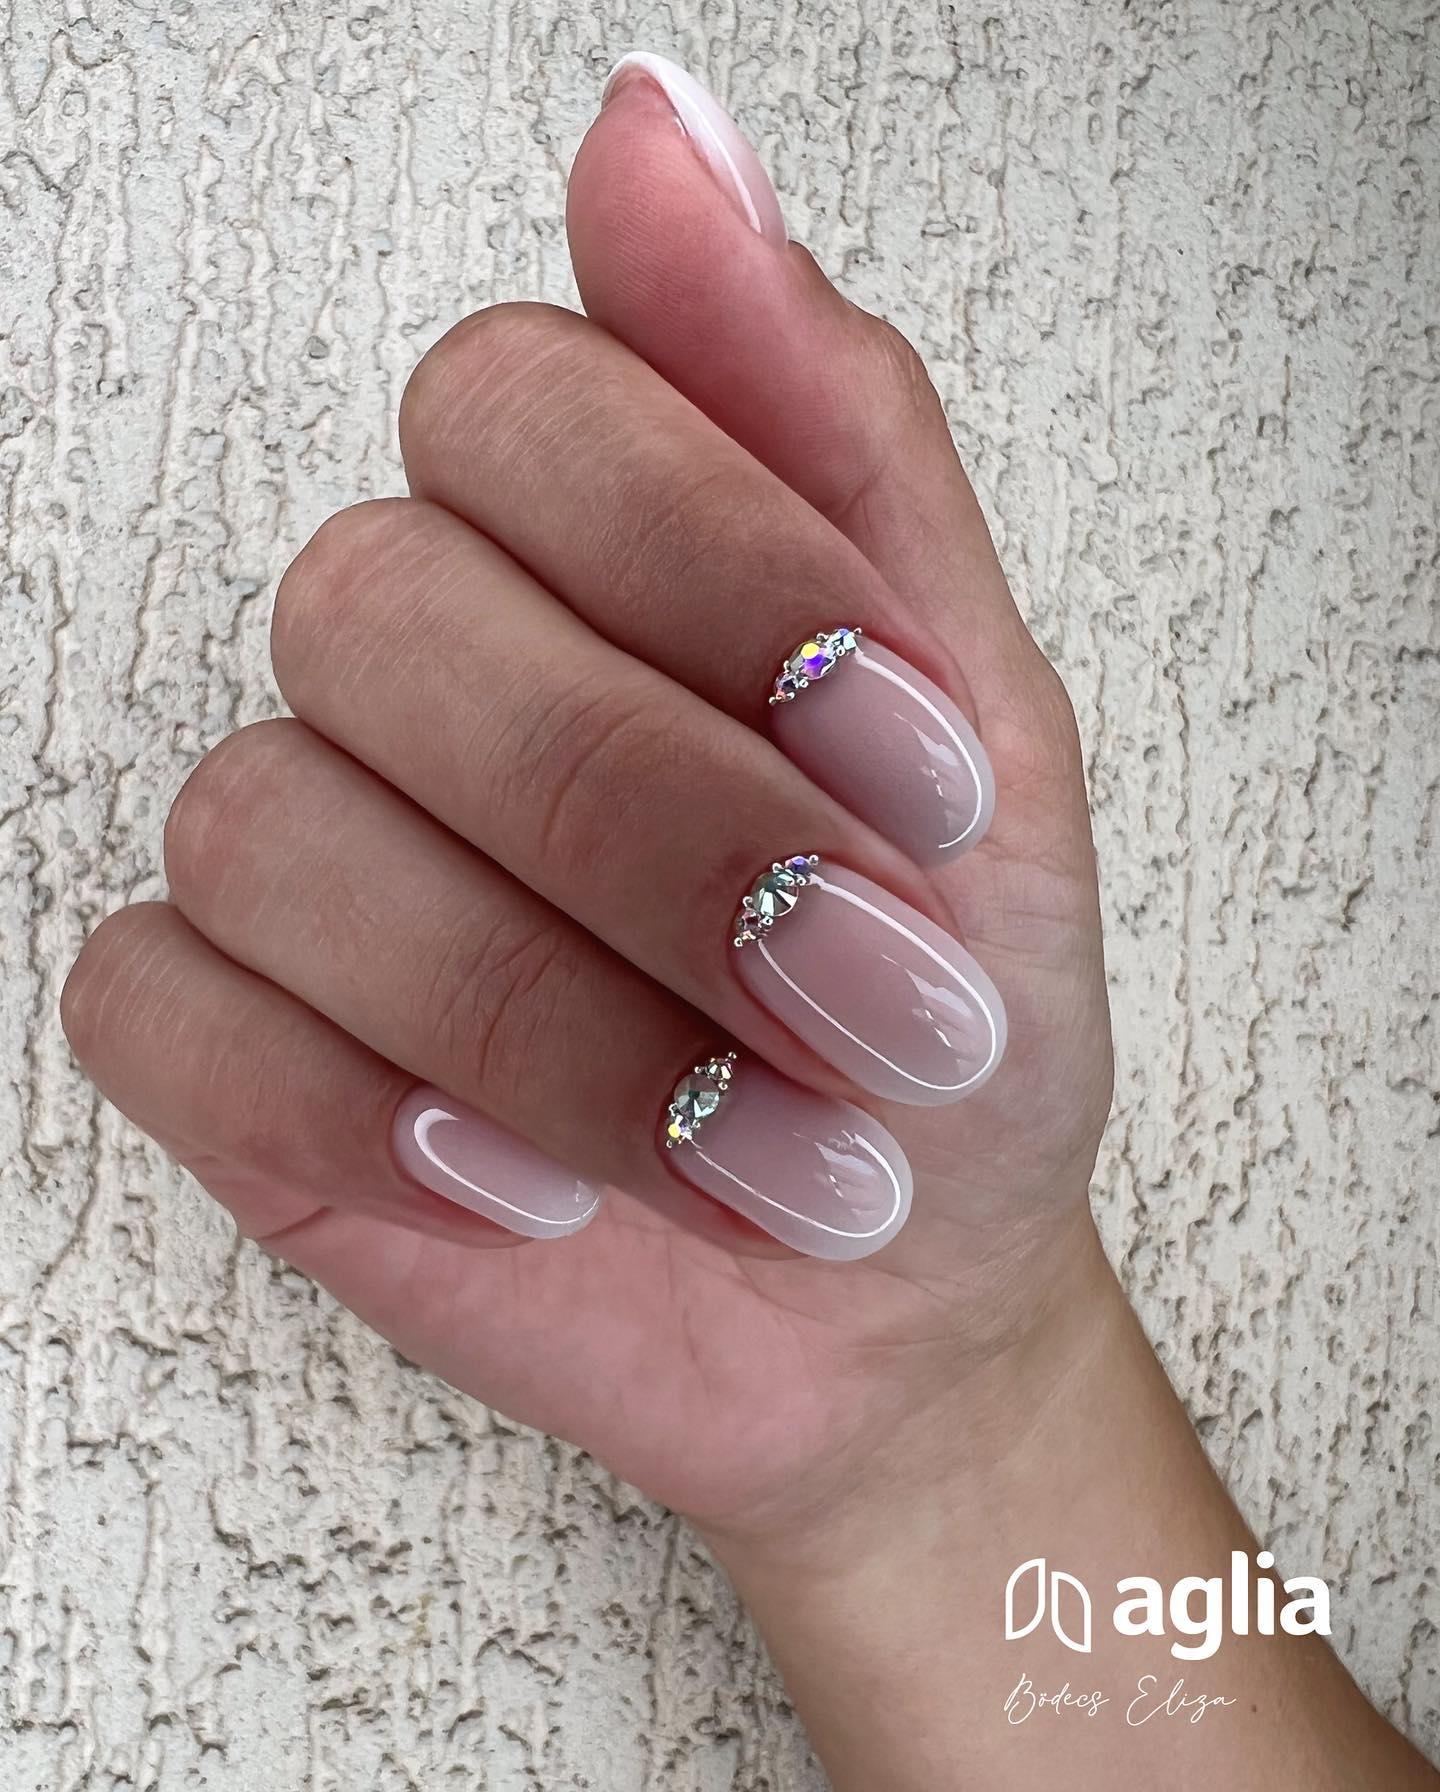 Wanna have have ombre-like nails to look amazing? White ombre nails will be matching with your wedding dress and the shiny stones on top of the three nails give them a quite chic look.